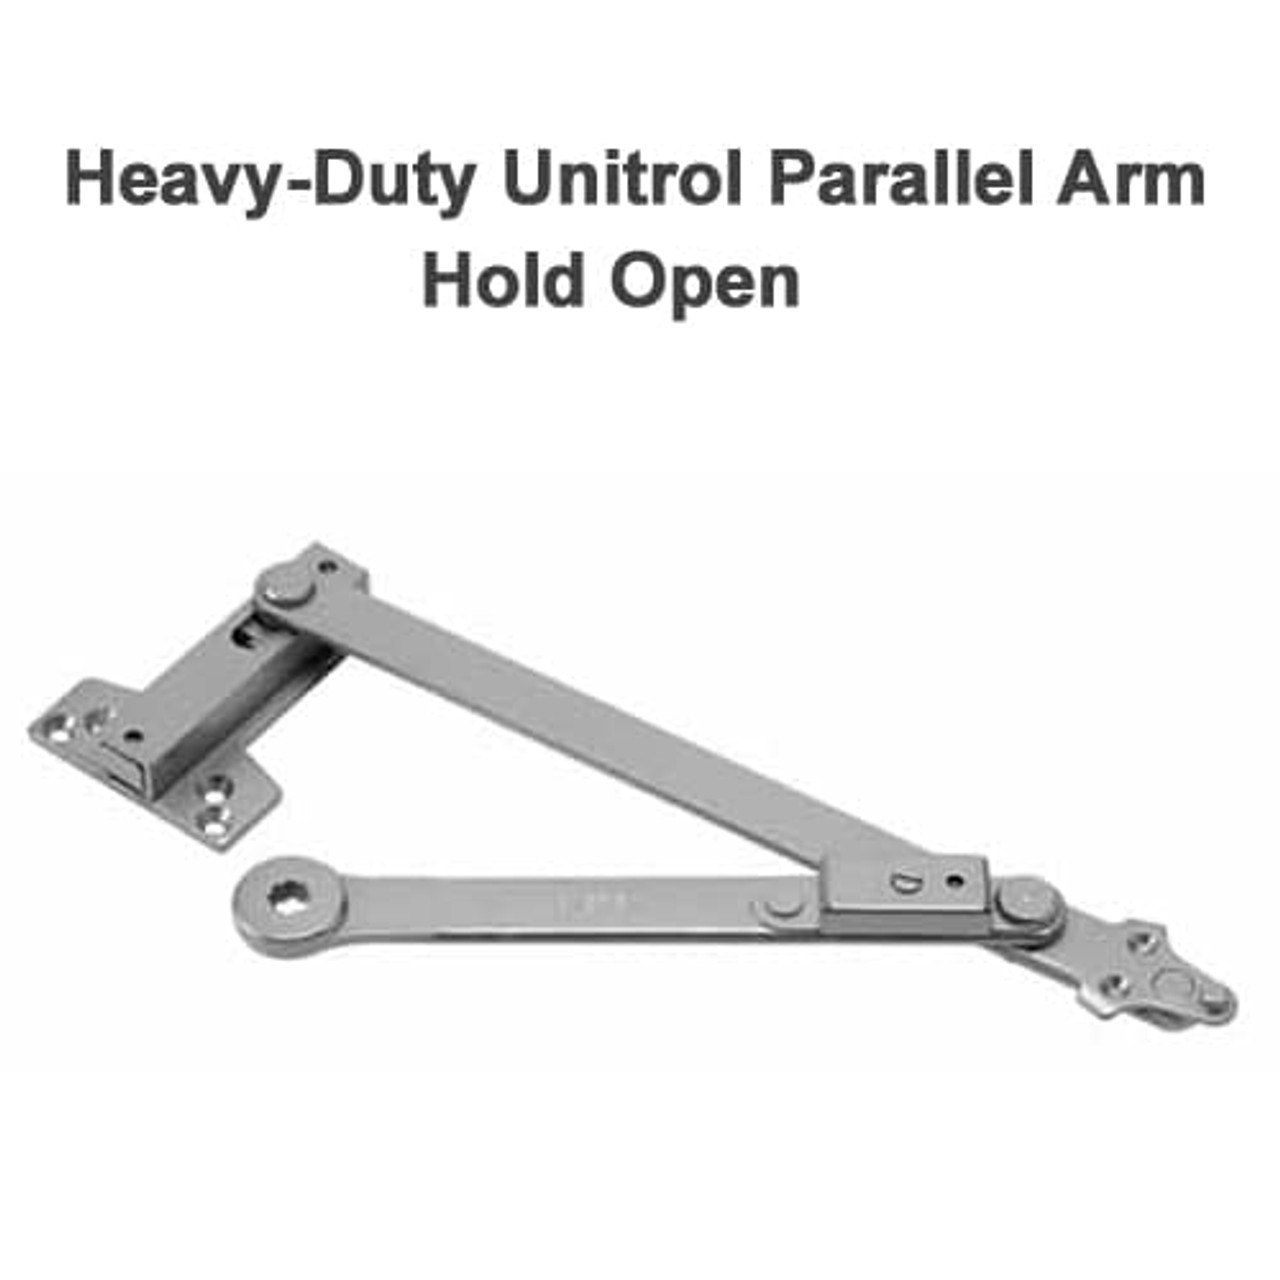 DC6210-A12-693-M54-W33 Corbin 6000 Series Multi-Sized Parallel Arm Door Closers with Heavy-Duty Unitrol with Hold Open in Black